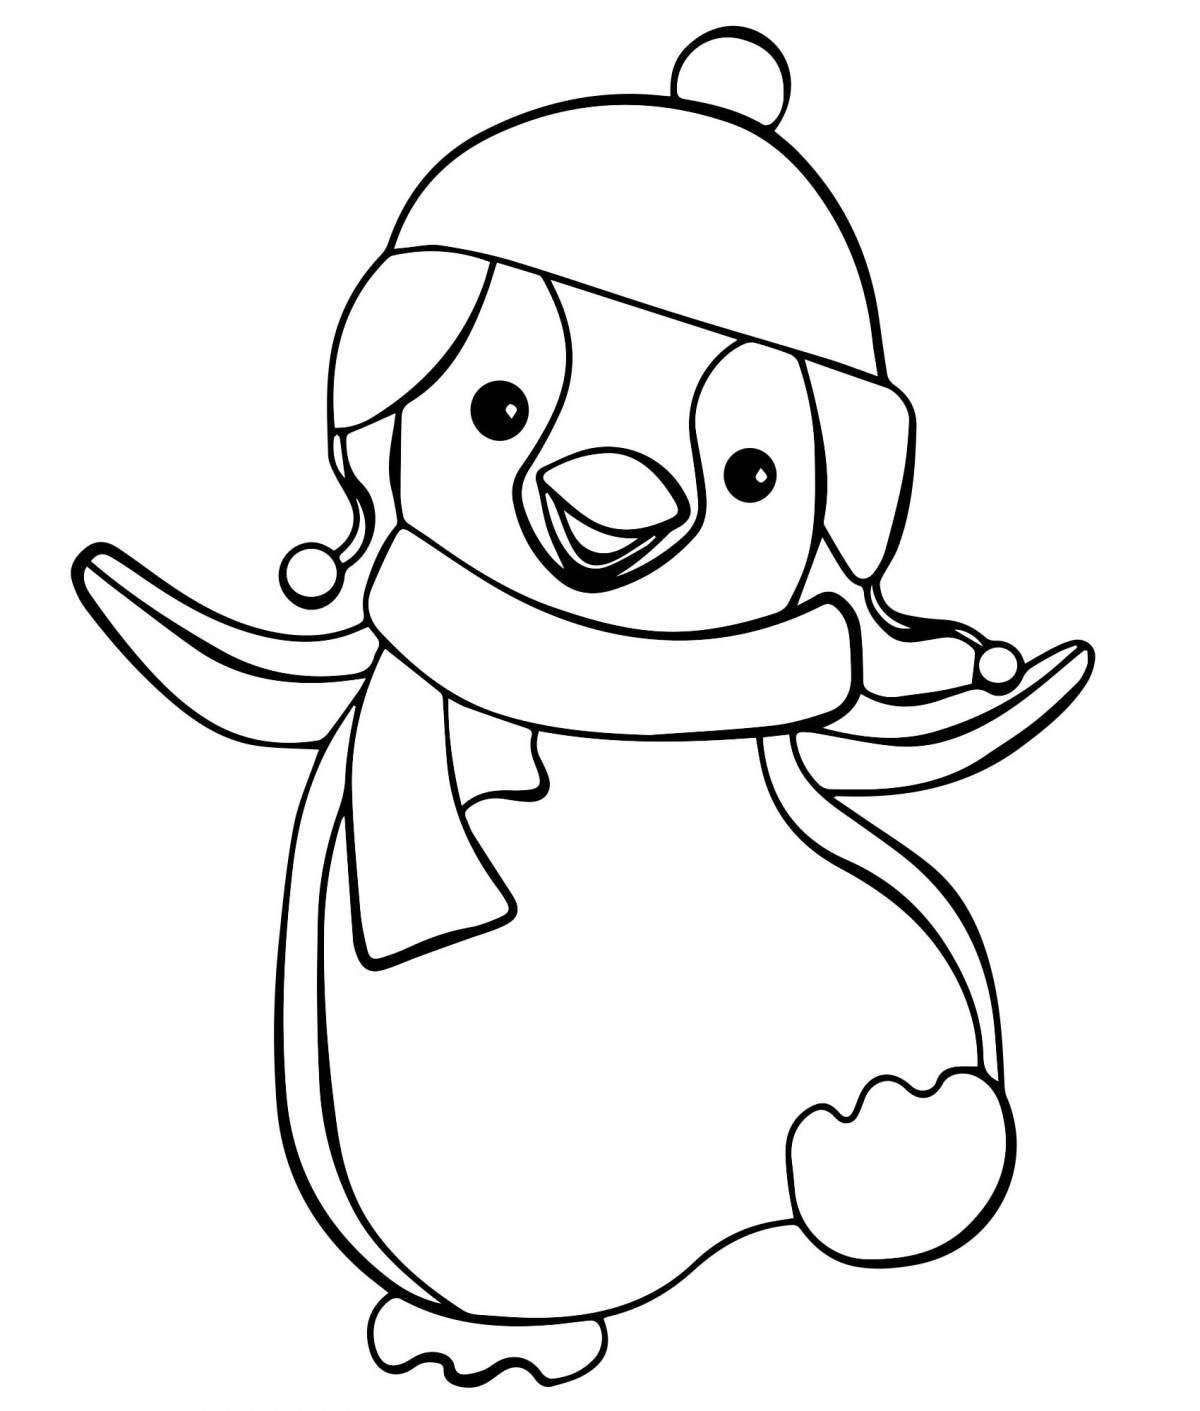 Coloring penguin with a charming pattern